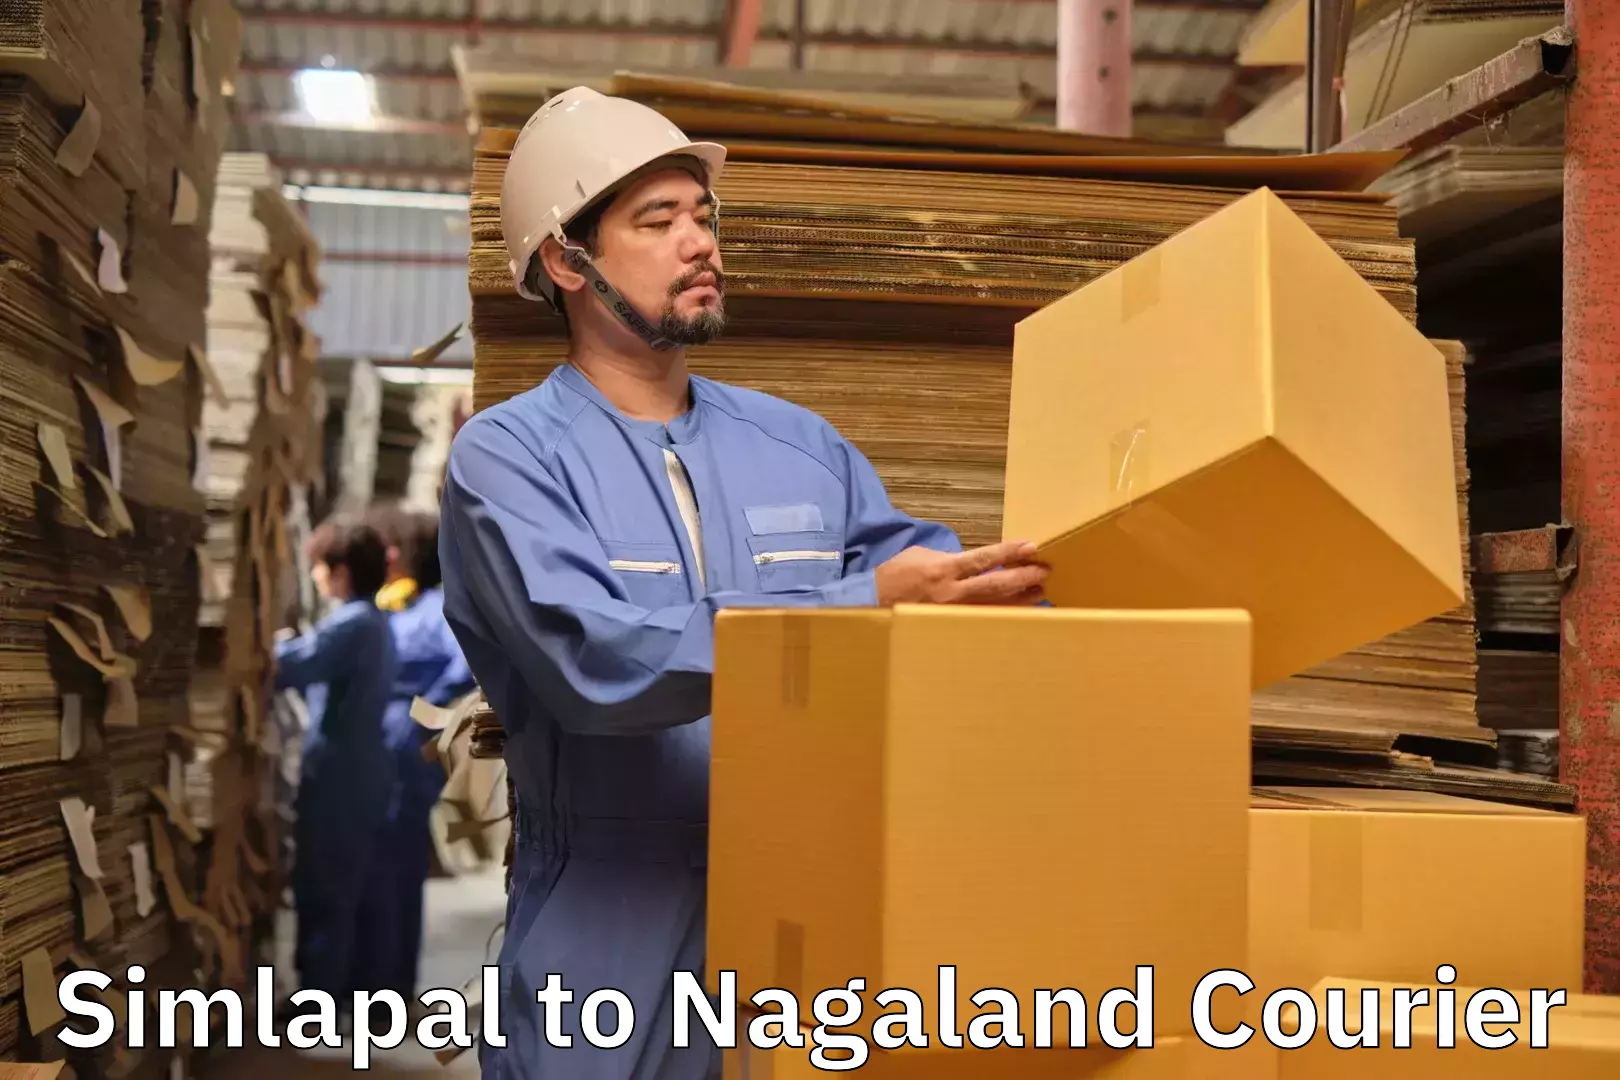 Luggage transport consultancy Simlapal to Nagaland